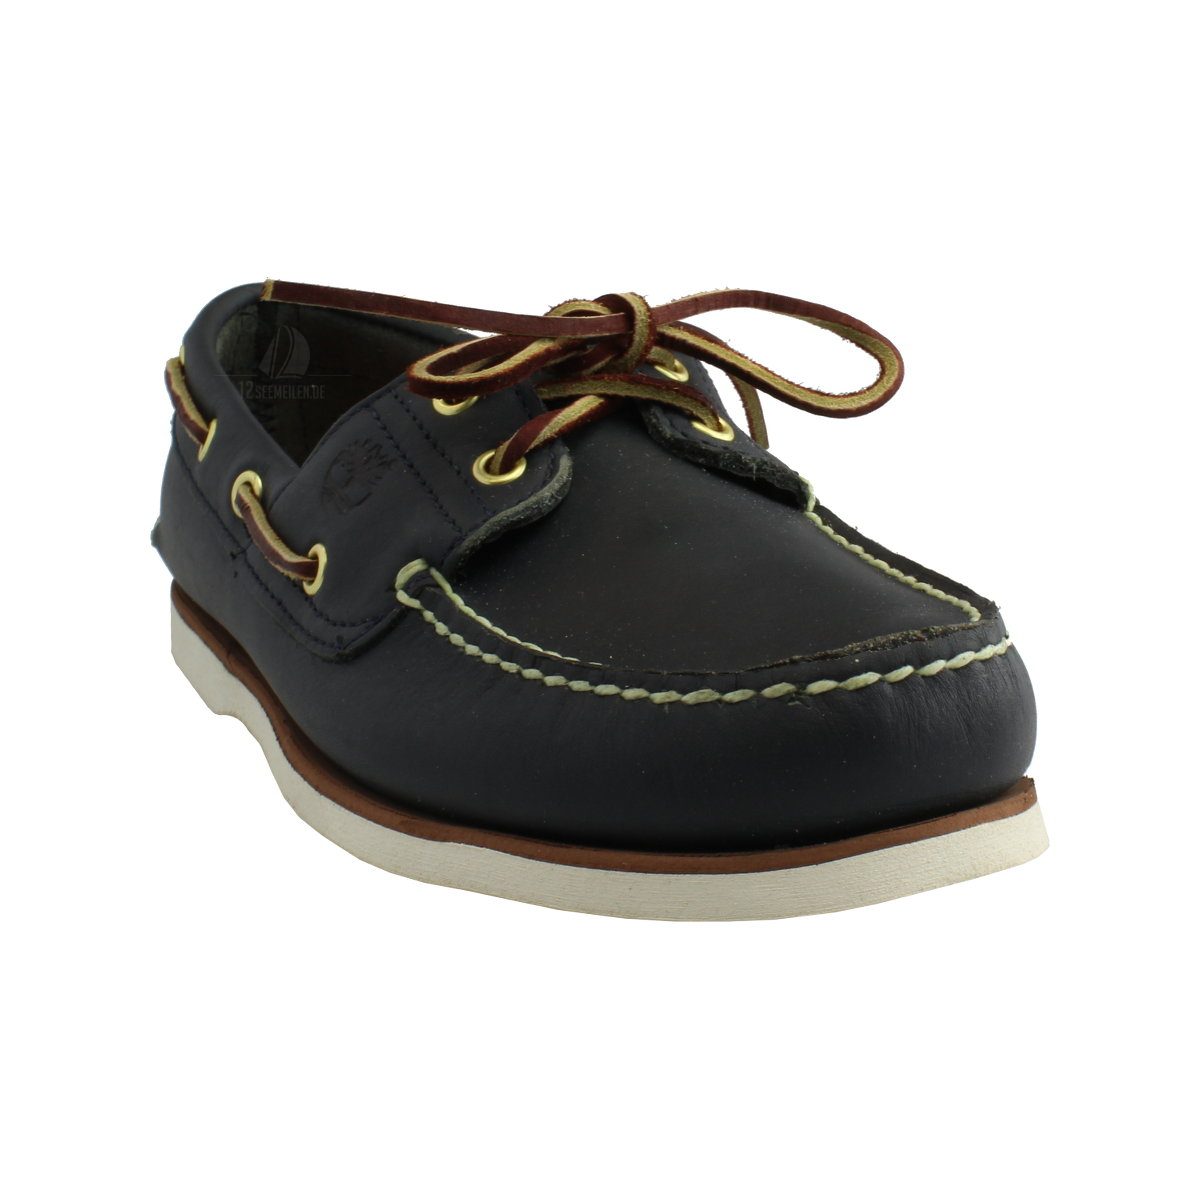 Timberland Classic Boat chaussures bateau homme navy eu 43,5 ( us 9,5 )